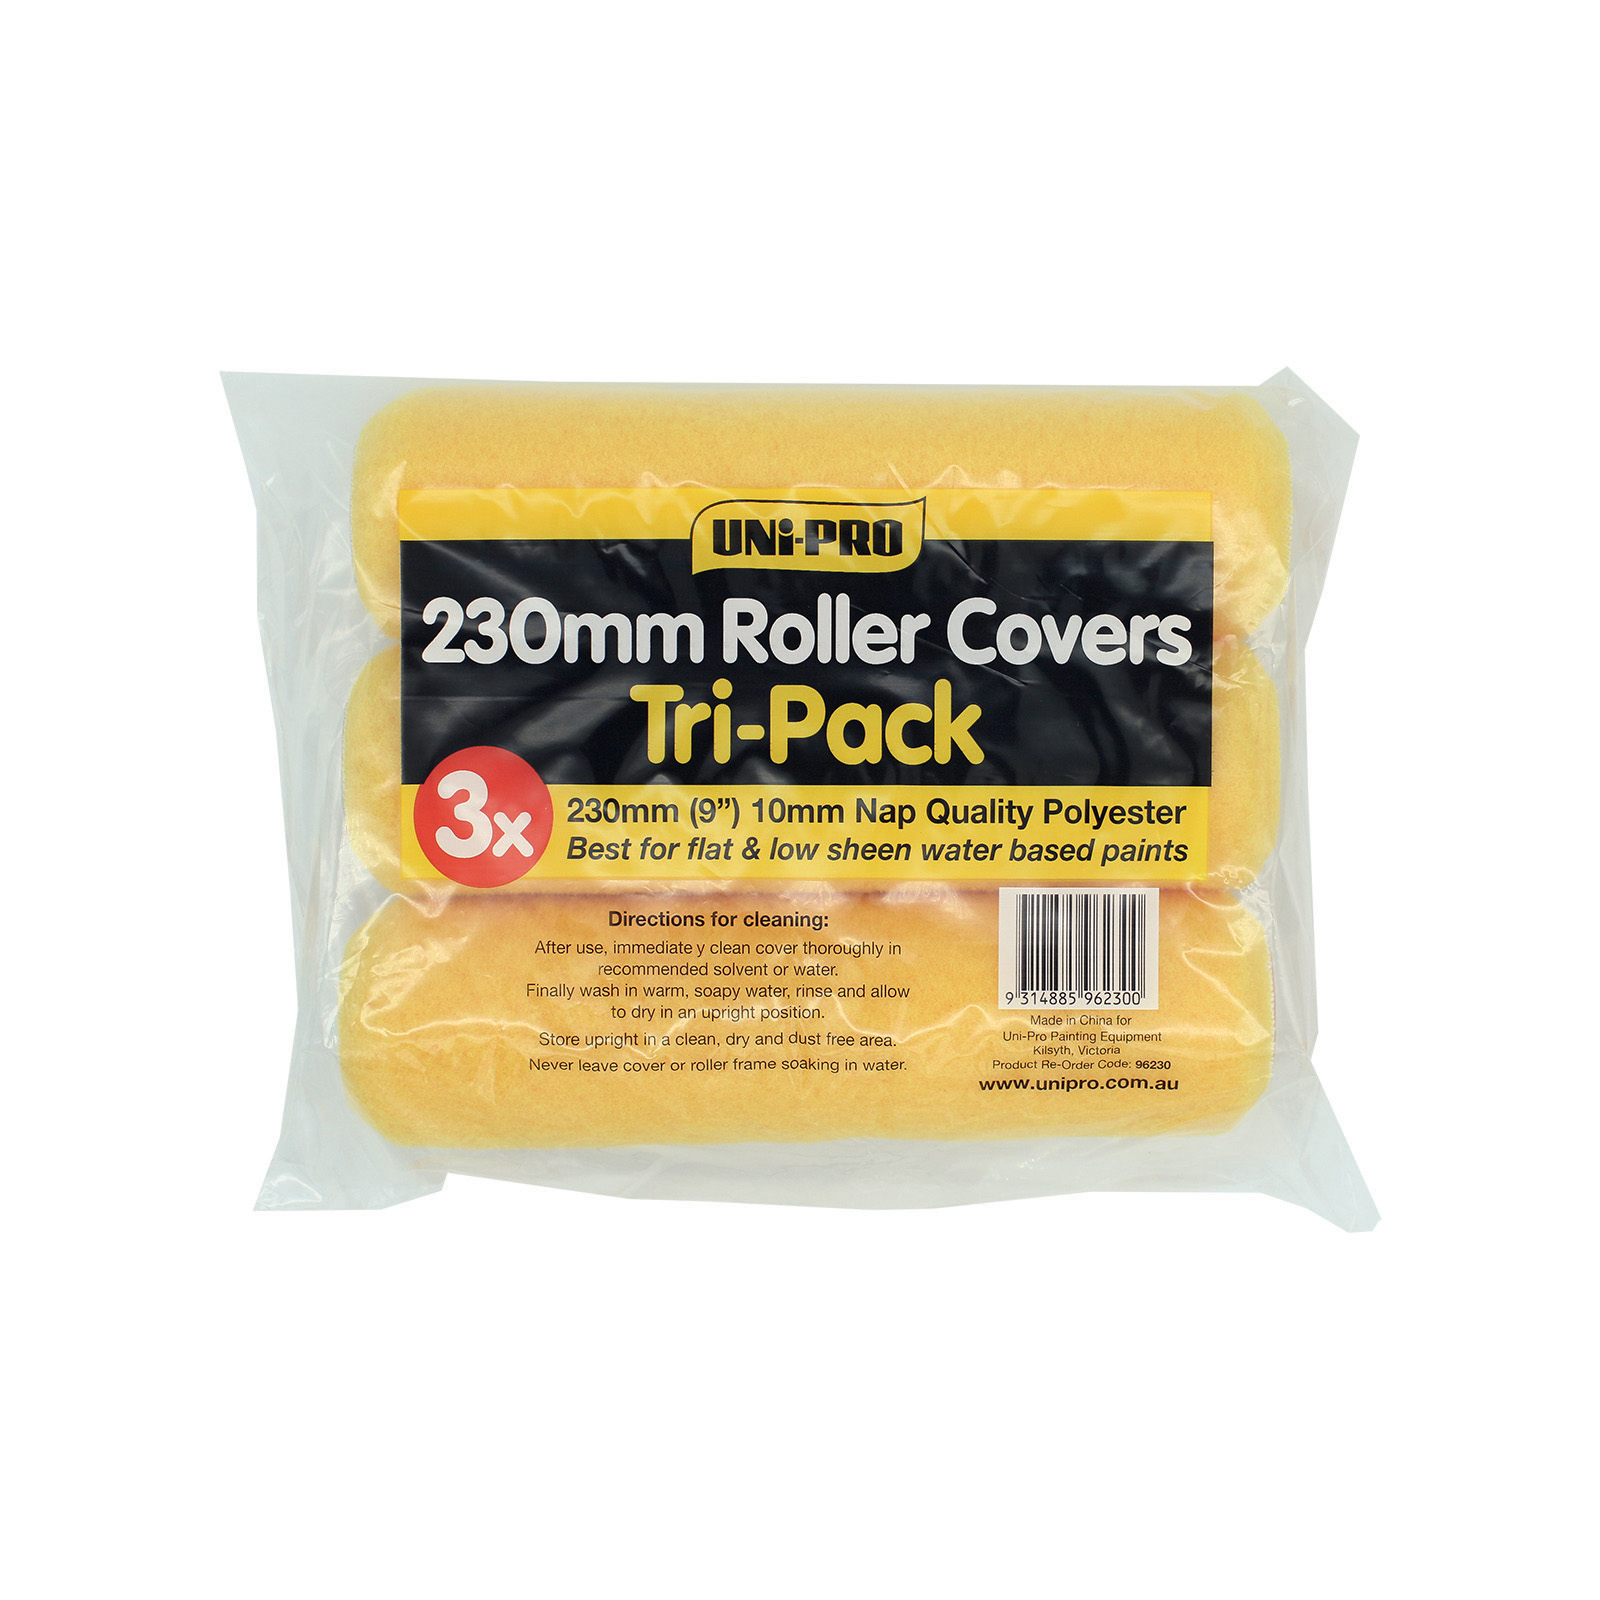 UNi-PRO Tri Pack Roller Covers - 10mm nap